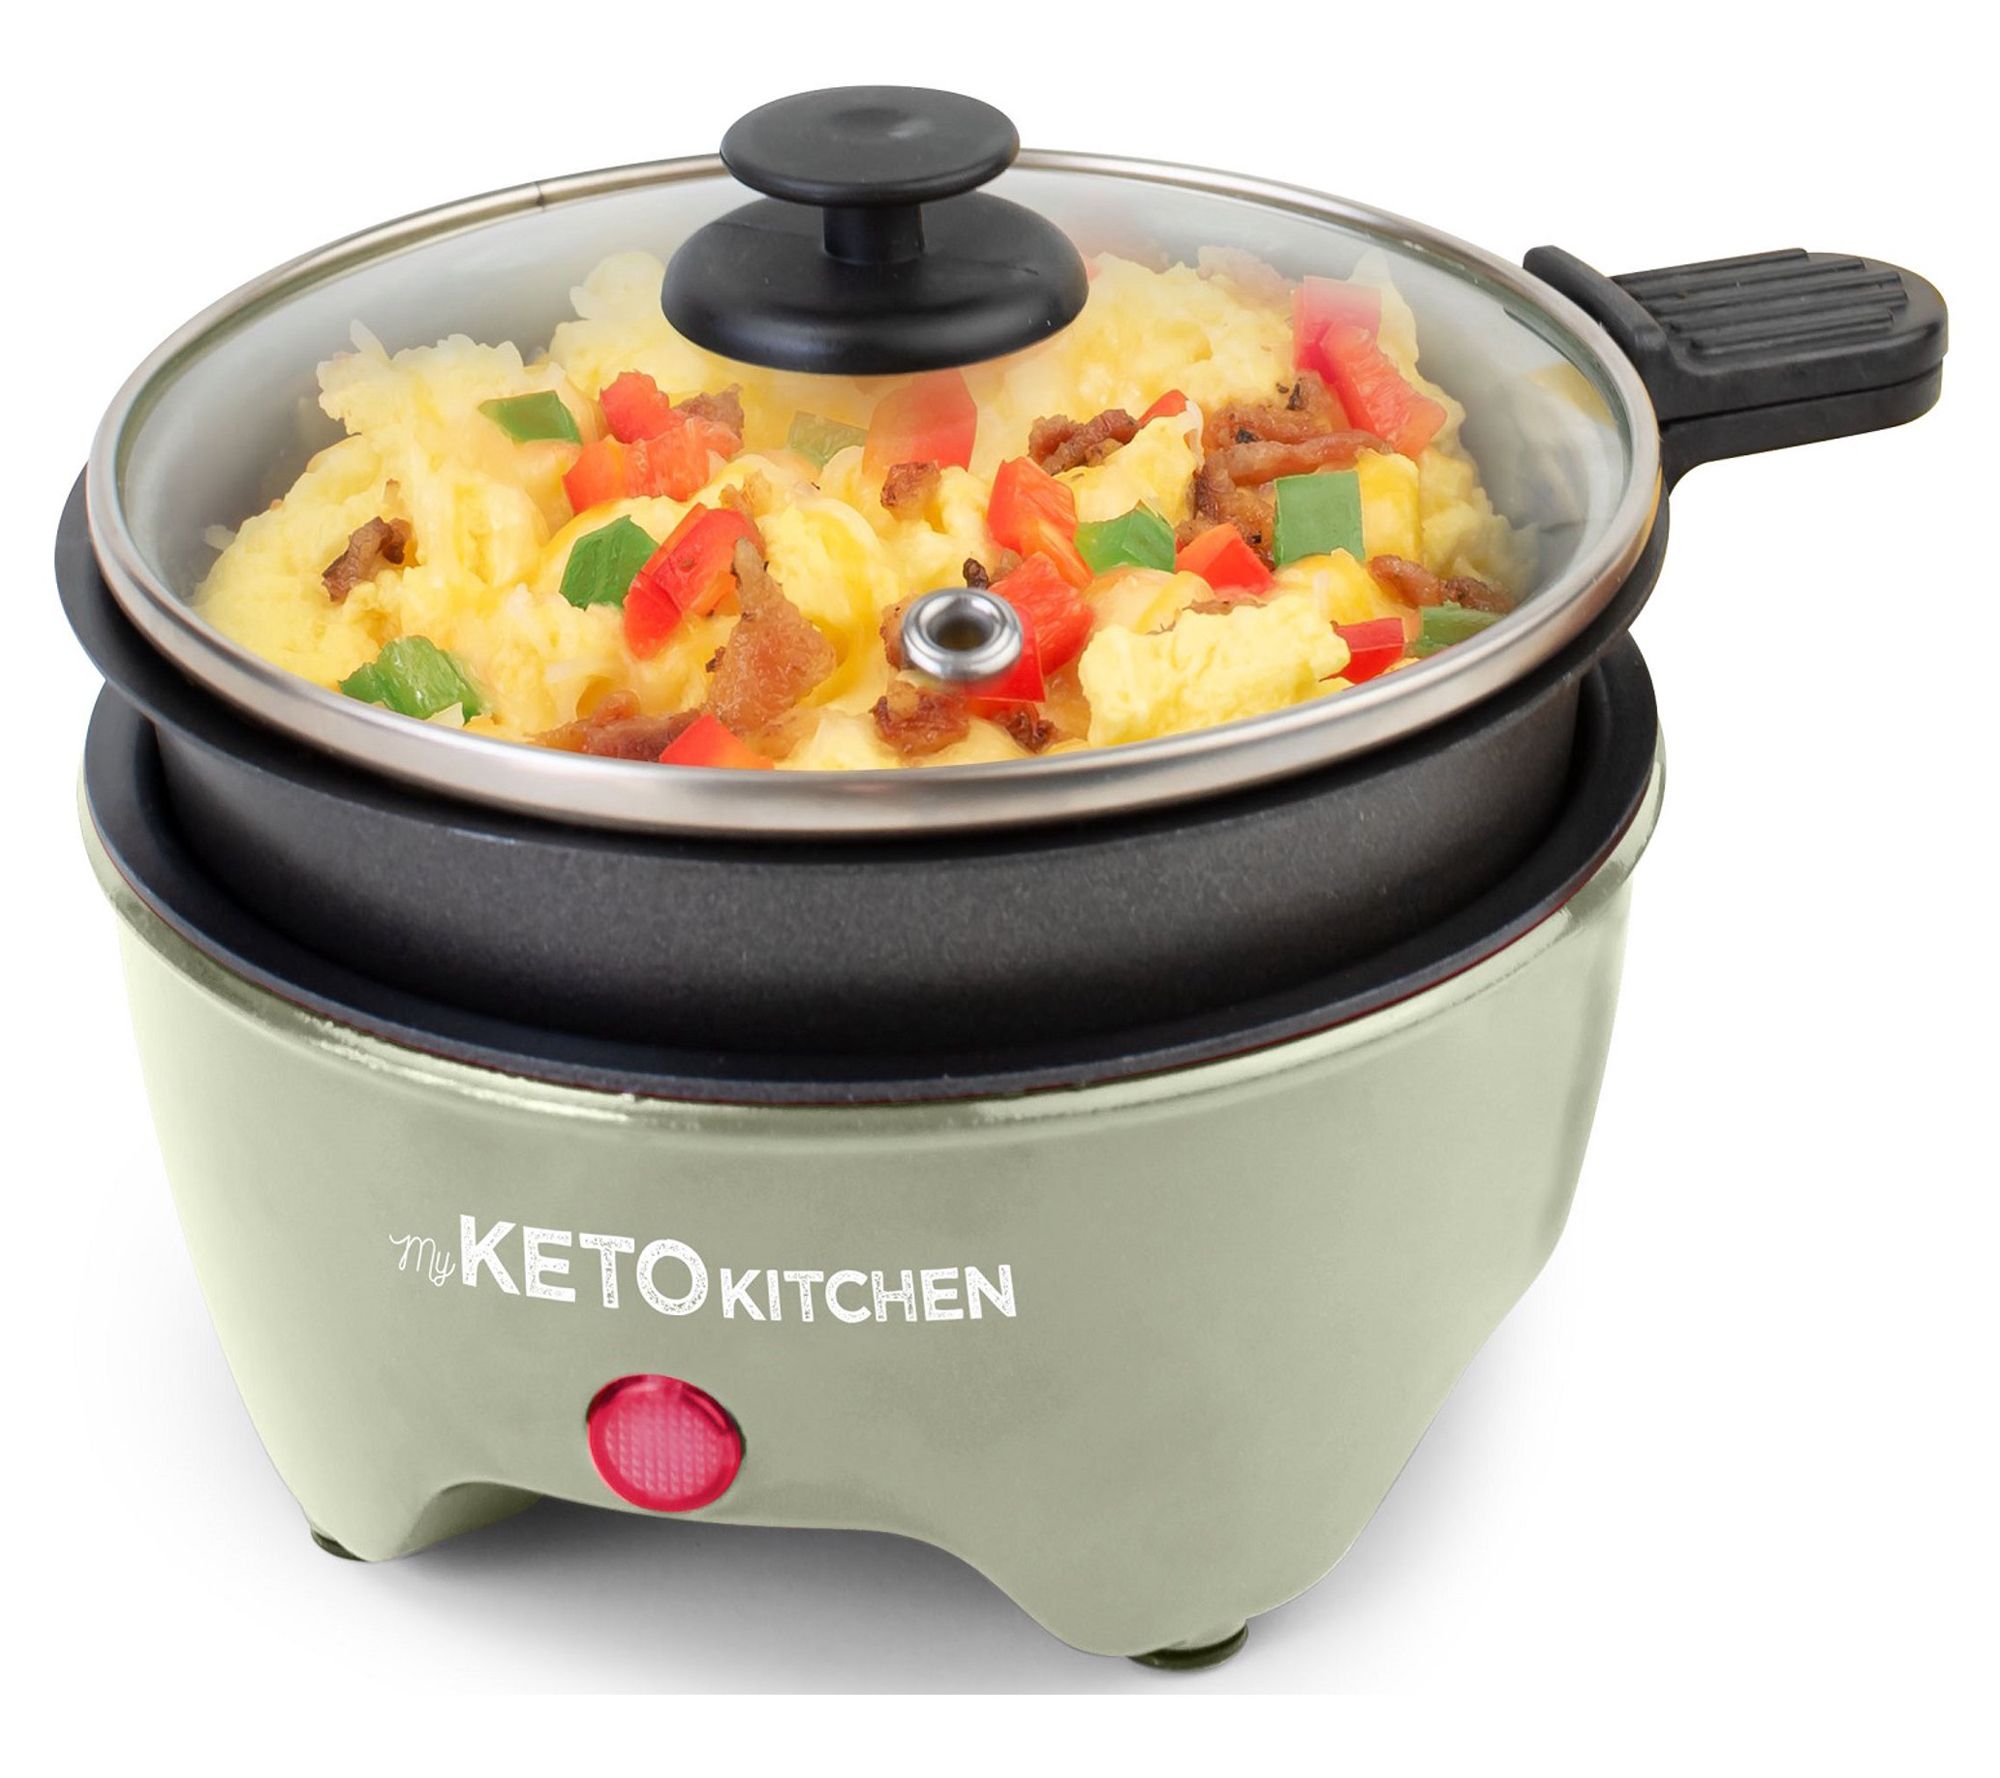 8.5 Personal Electric Skillet with Glass Lid